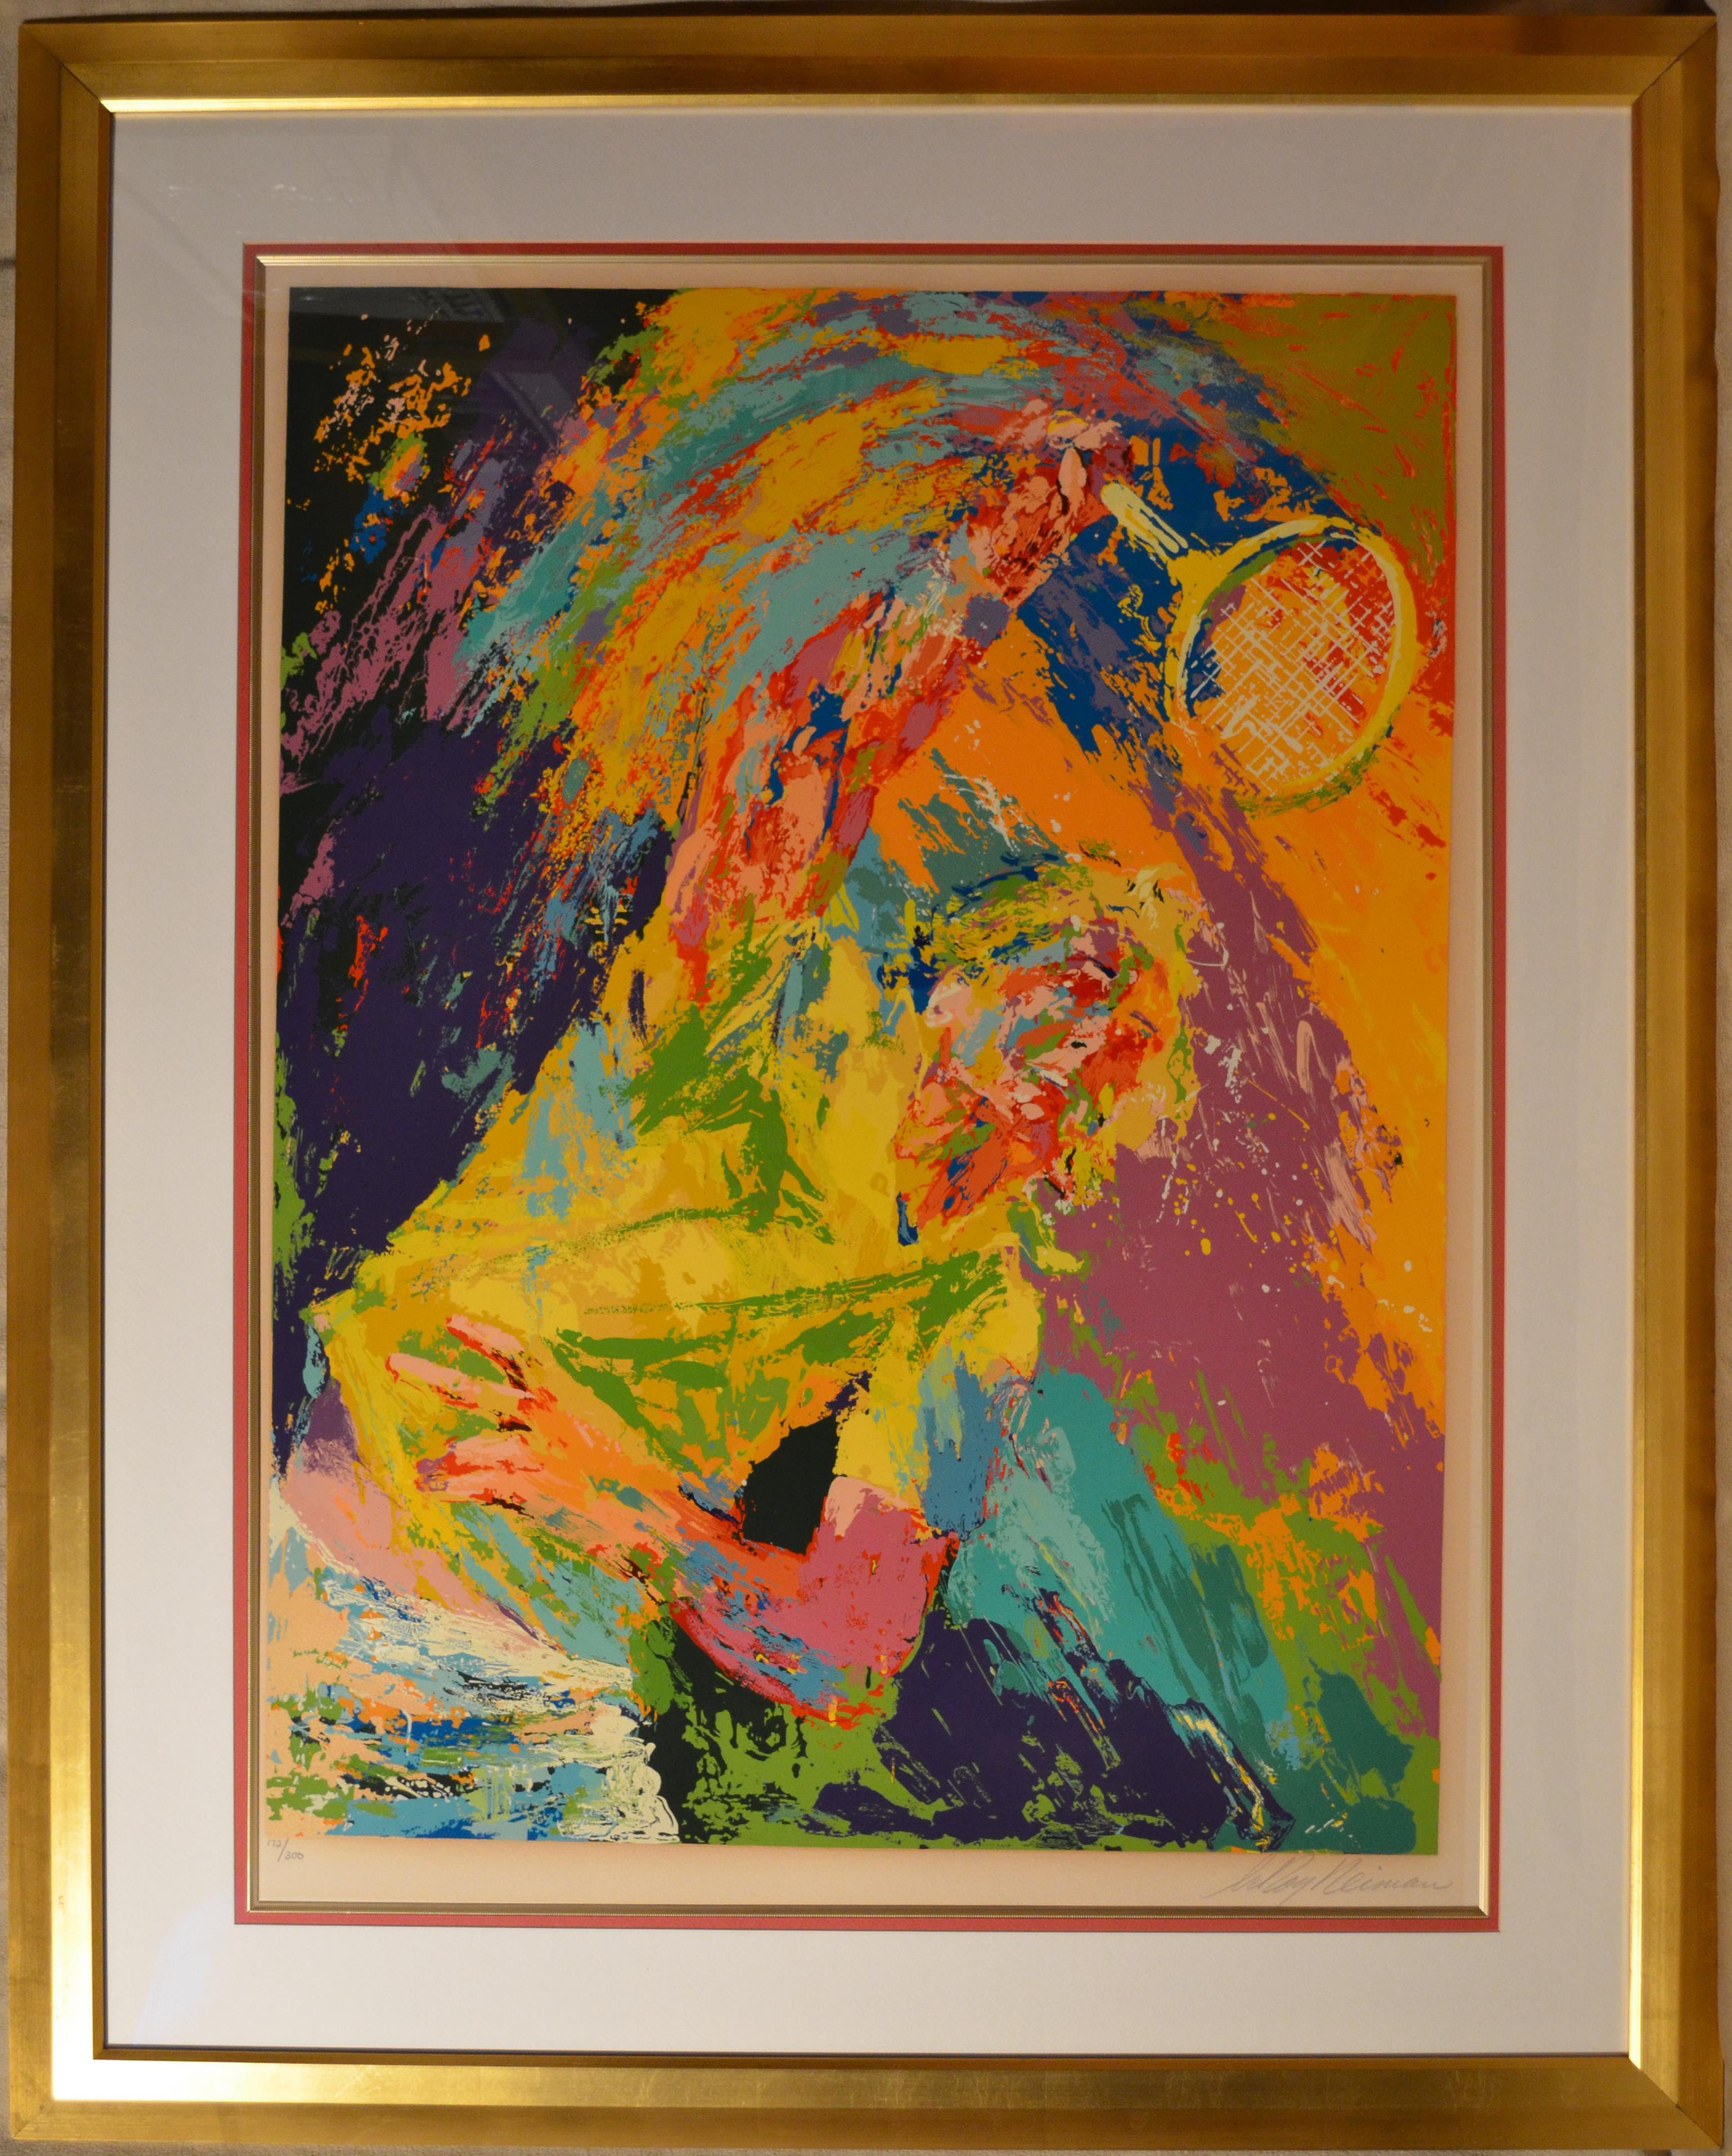 Power Serve - Limited Edition Serigraph by LeRoy Neiman